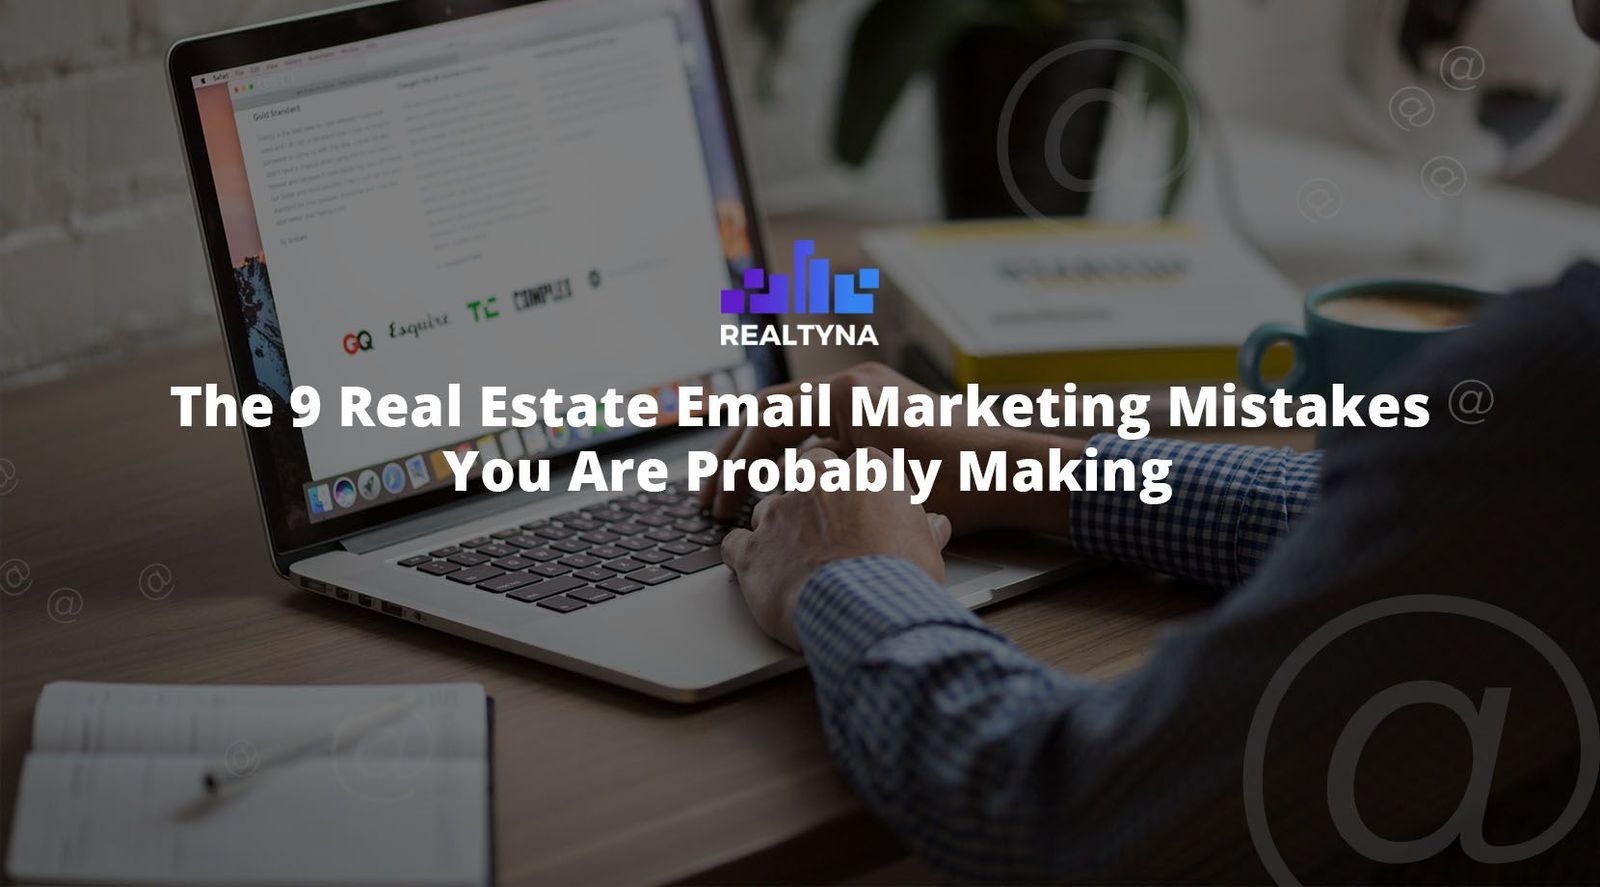 The 9 Real Estate Email Marketing Mistakes You Are Probably Making